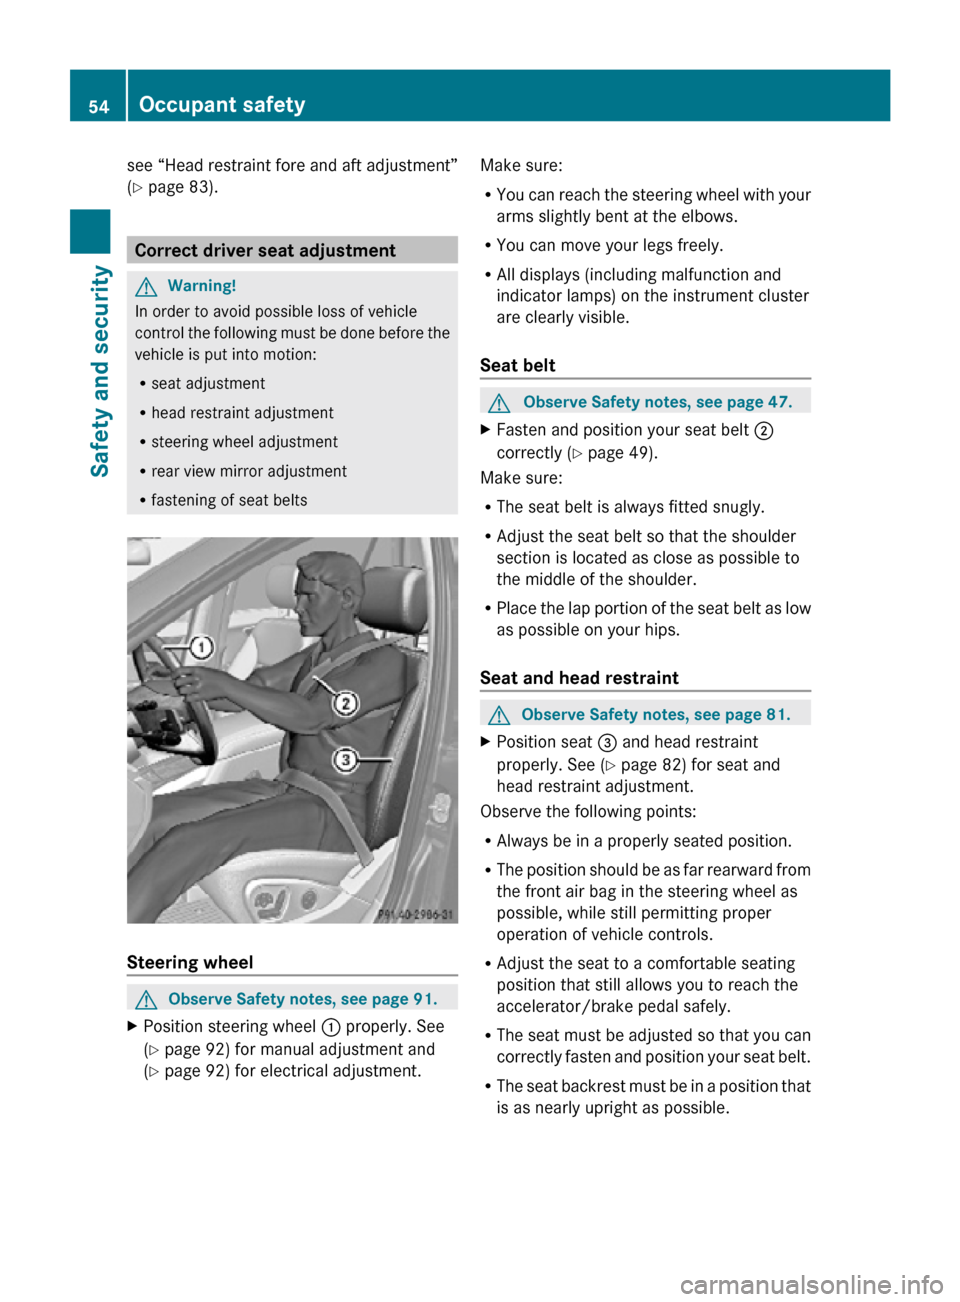 MERCEDES-BENZ R320 2010 W251 User Guide see “Head restraint fore and aft adjustment”
(Y page 83).
Correct driver seat adjustment
G
Warning!
In order to avoid possible loss of vehicle
control the following must be done before the
vehicle